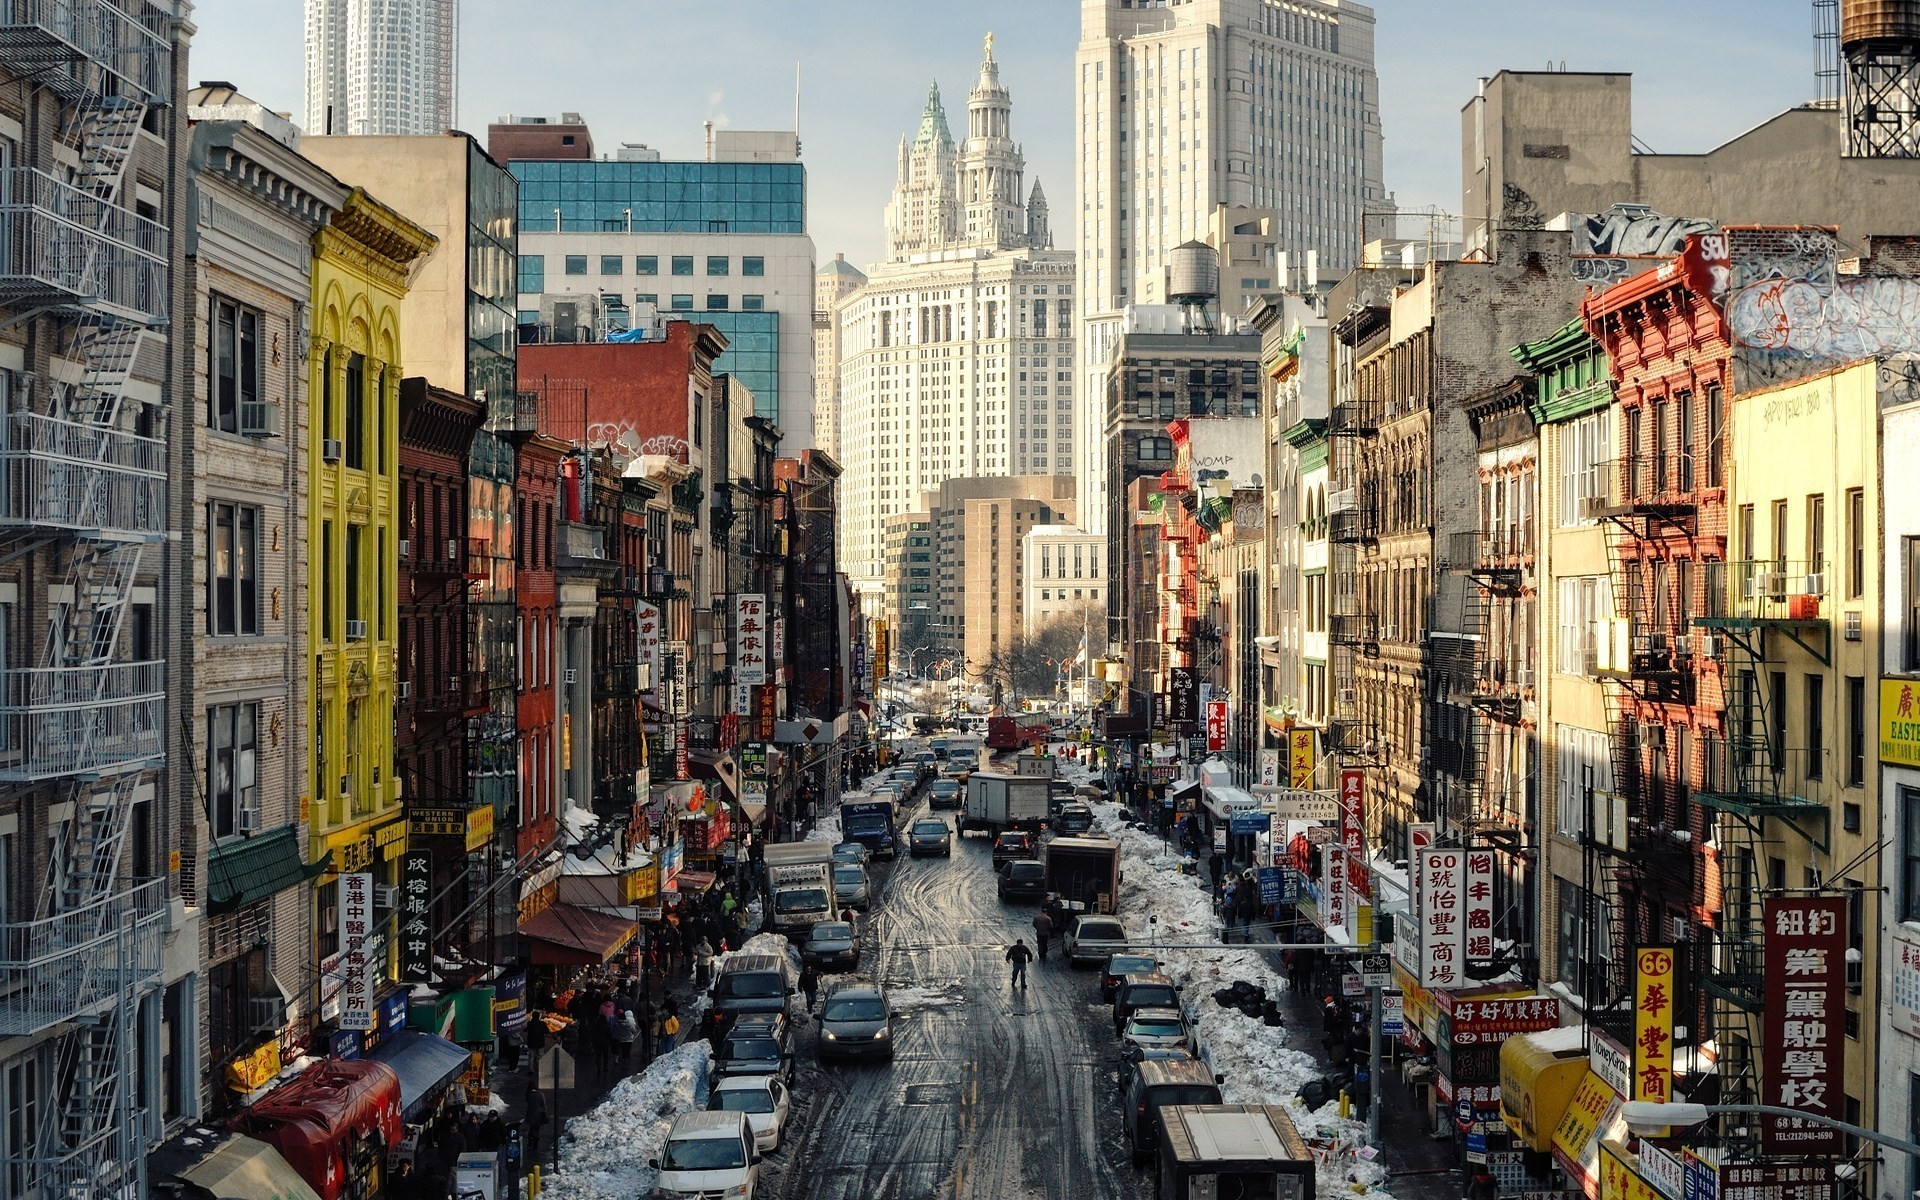 cityscapes, New, York, City, Chinatown, Street, Cars, Roads, People, Winter, Buildings Wallpaper